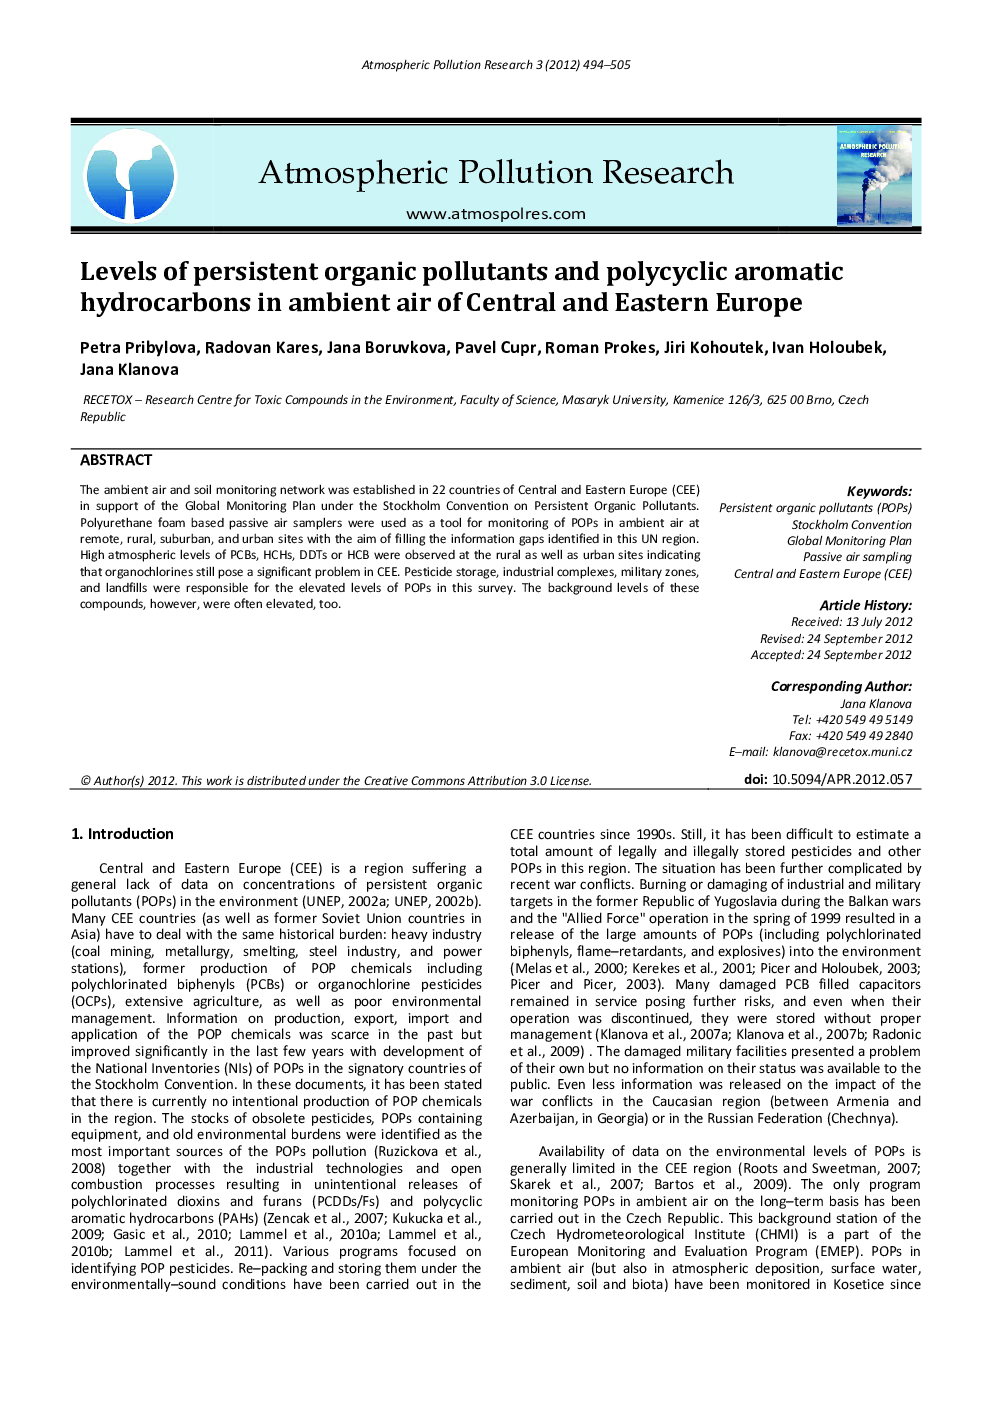 Levels of persistent organic pollutants and polycyclic aromatic hydrocarbons in ambient air of Central and Eastern Europe